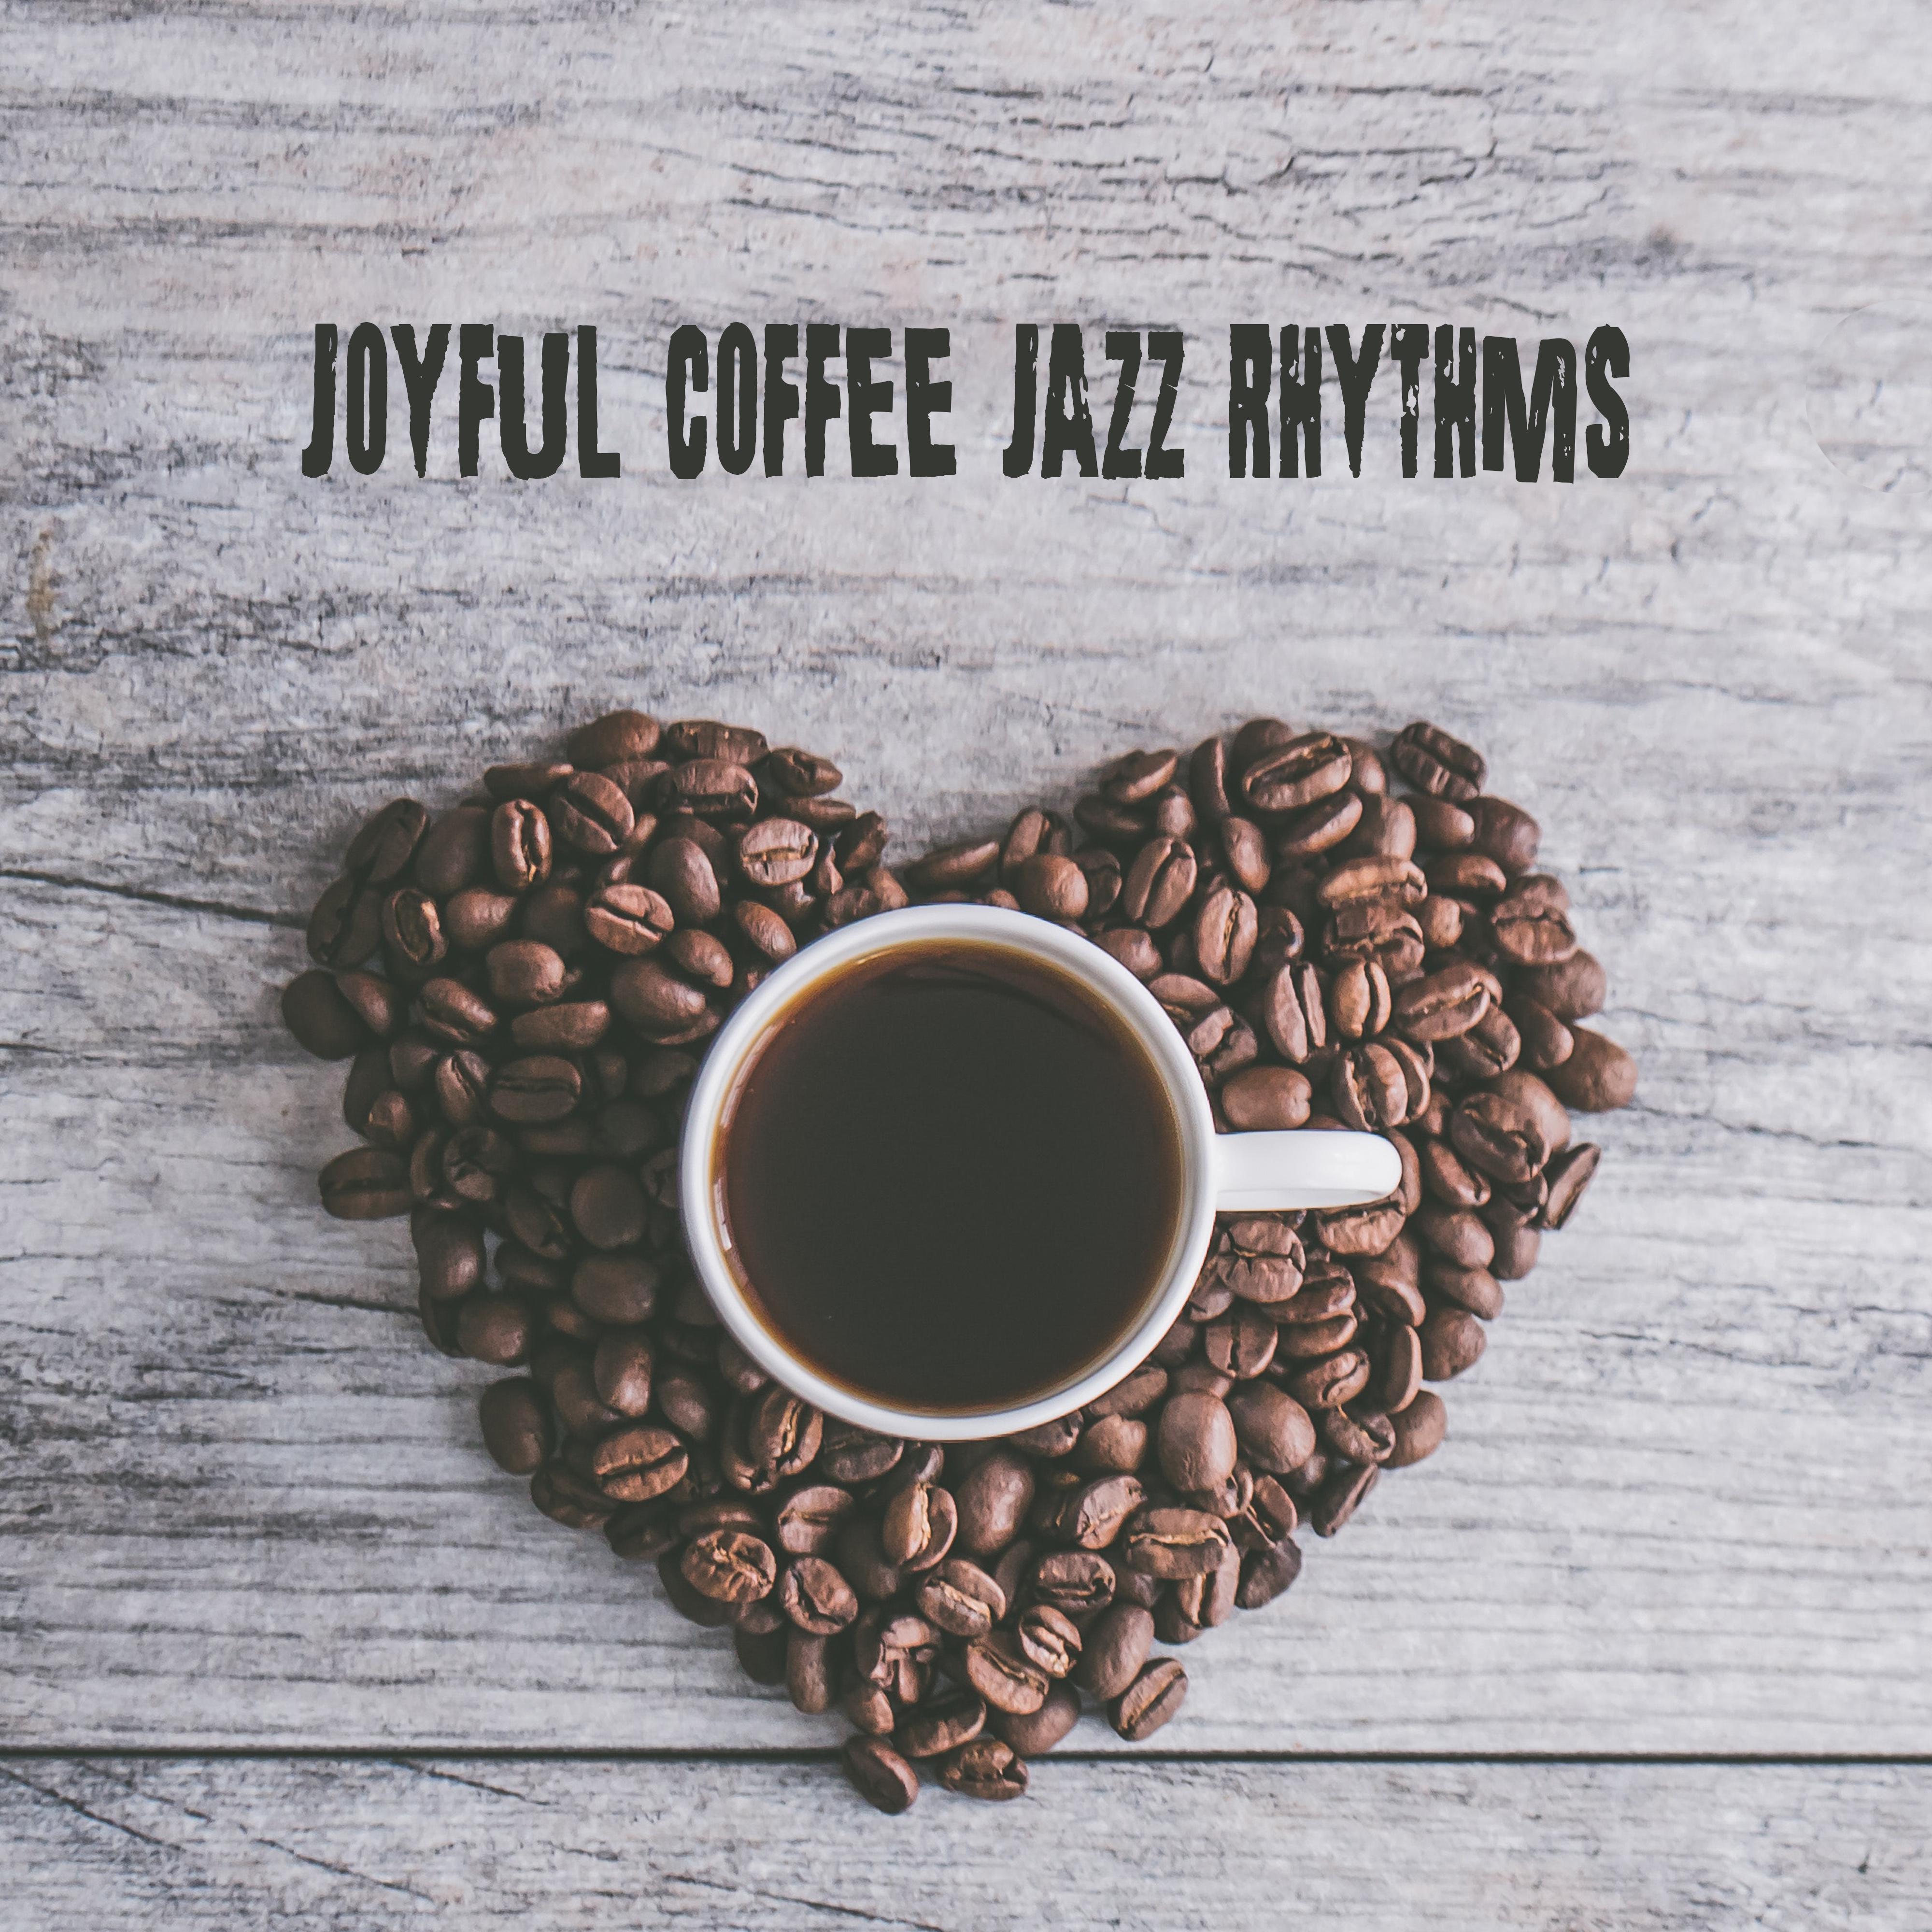 Joyful Coffee Jazz Rhythms: 2019 Smooth Jazz Music Selection, Perfect Cafe Background Songs, Vintage Melodies for Relaxing with Coffee, Dessert & Friends